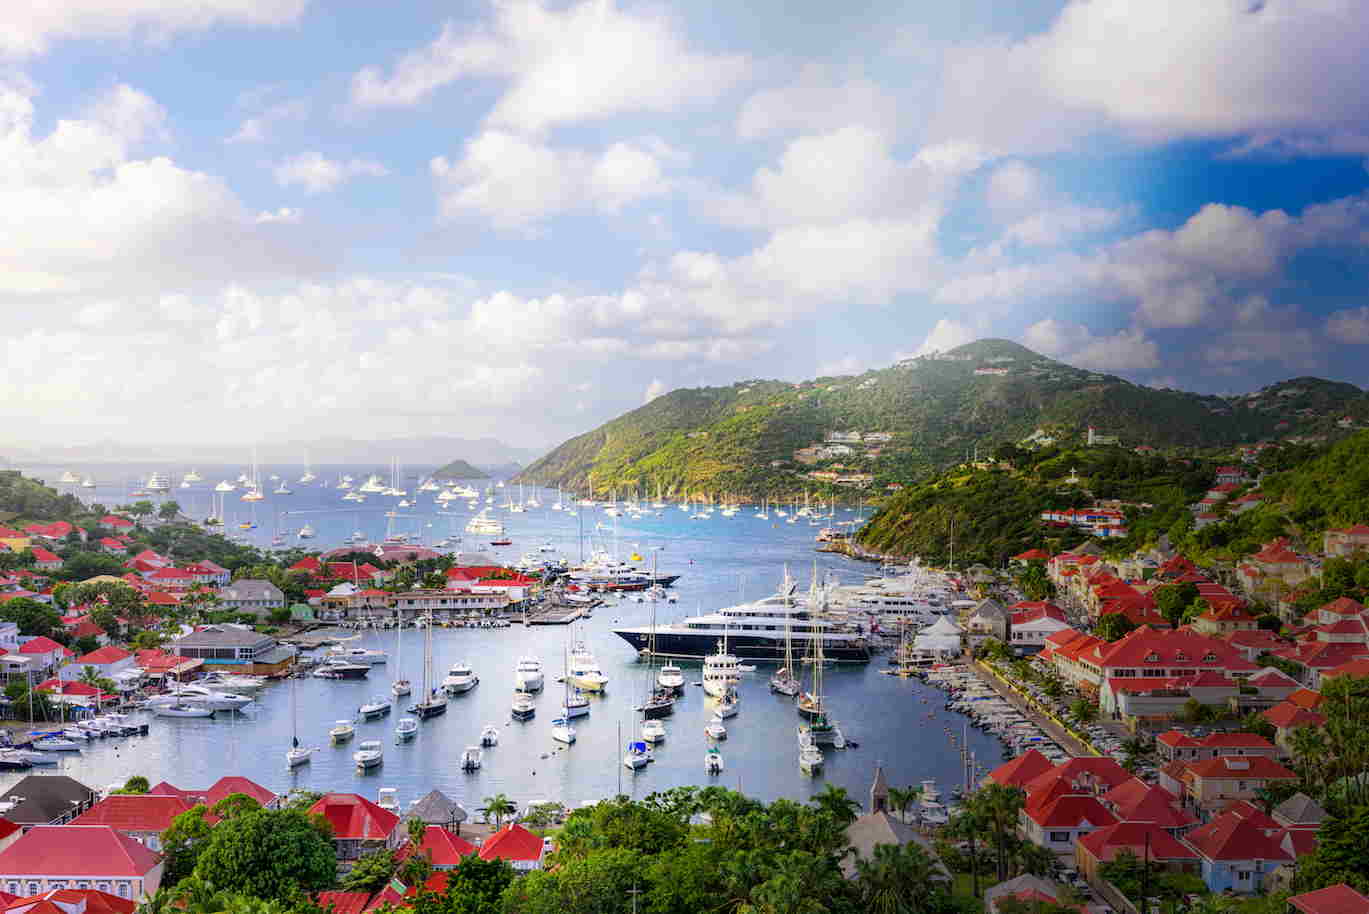 A Luxury Travel Guide To St. Barths 2021